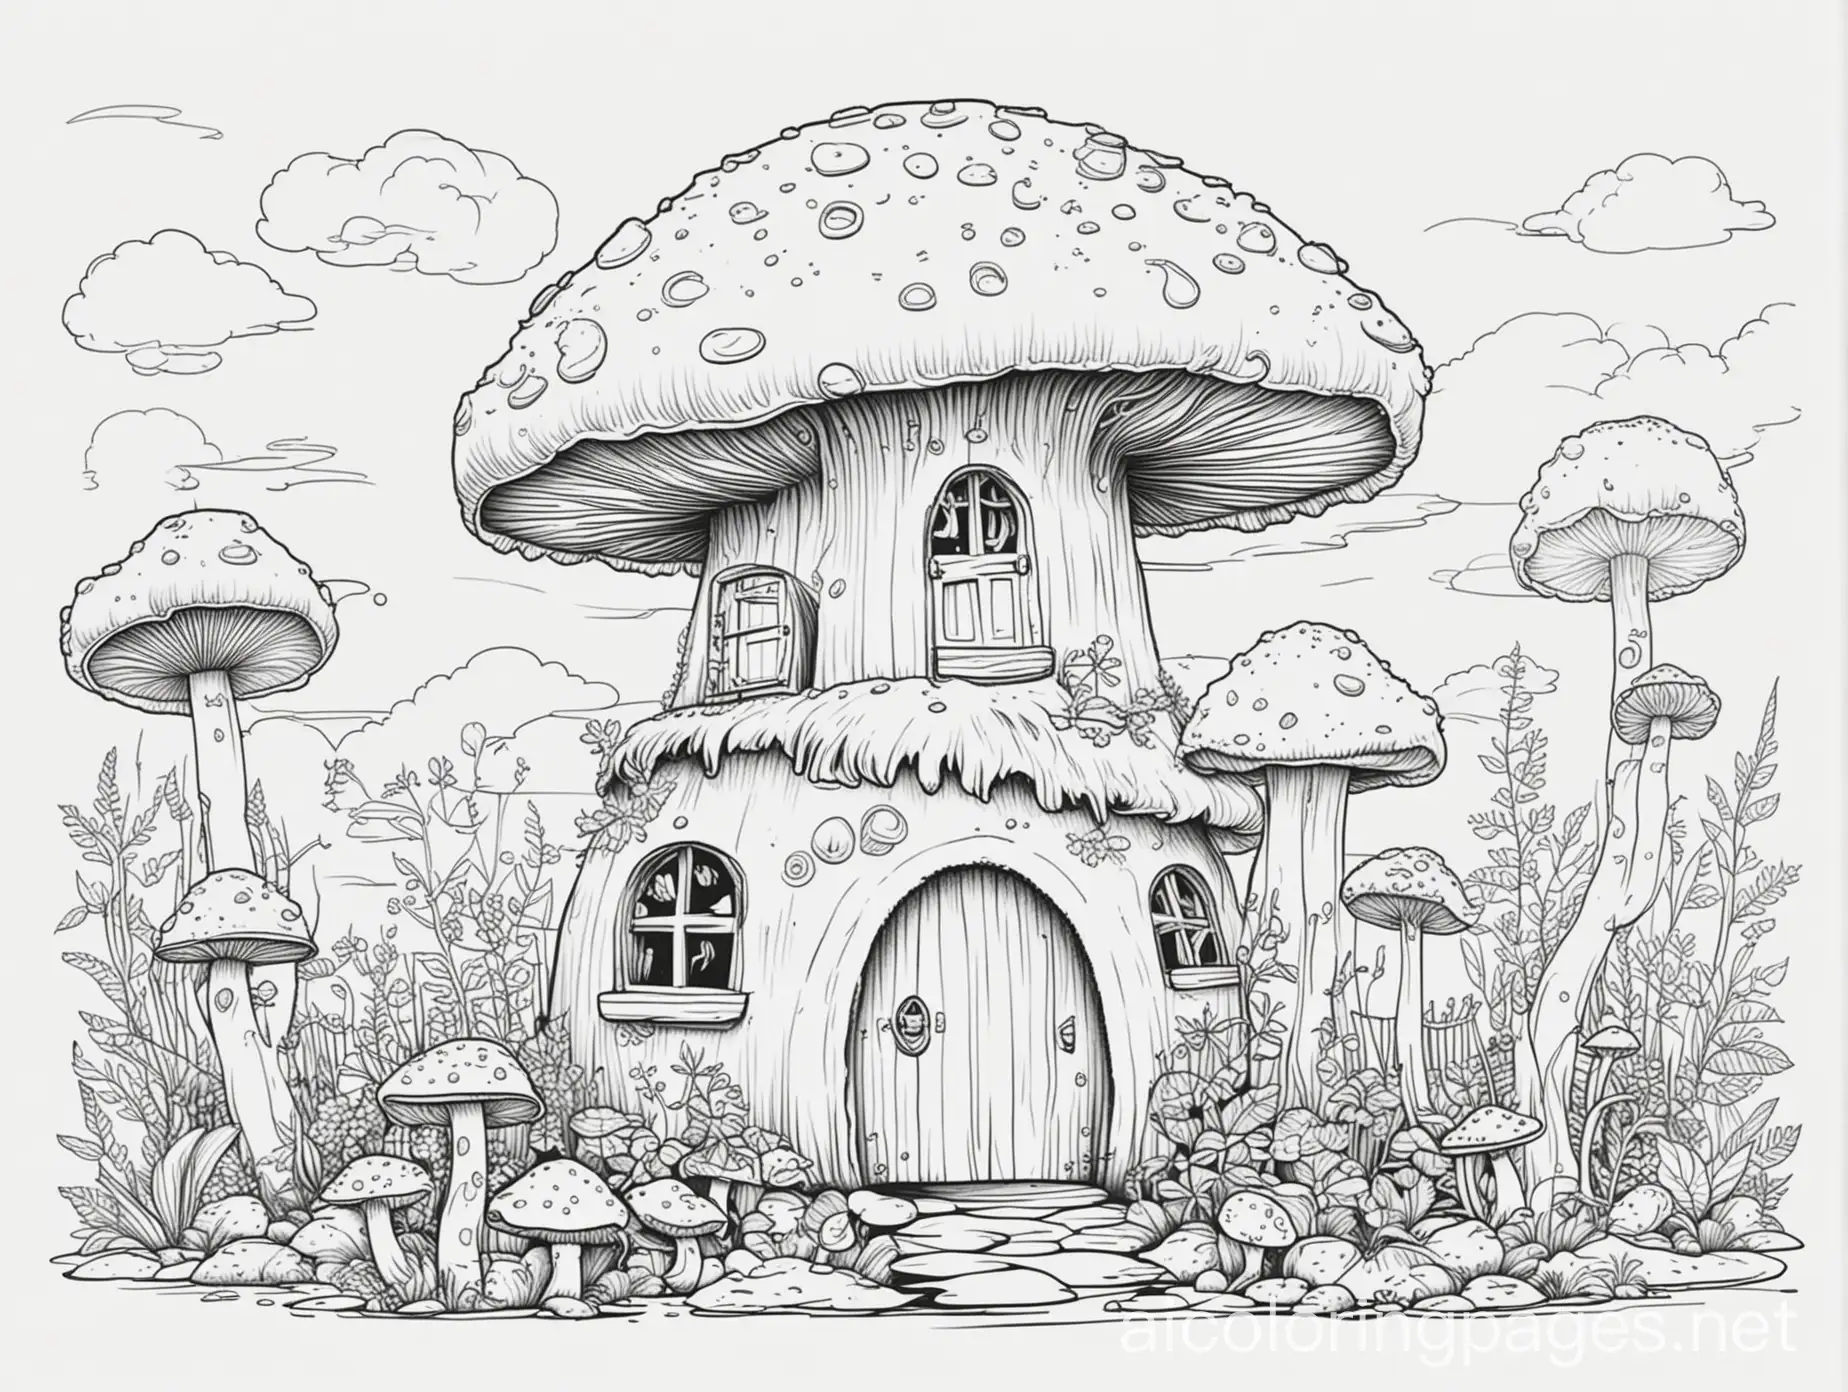 Mushroom house , Coloring Page, black and white, line art, white background, Simplicity, Ample White Space. The background of the coloring page is plain white to make it easy for young children to color within the lines. The outlines of all the subjects are easy to distinguish, making it simple for kids to color without too much difficulty